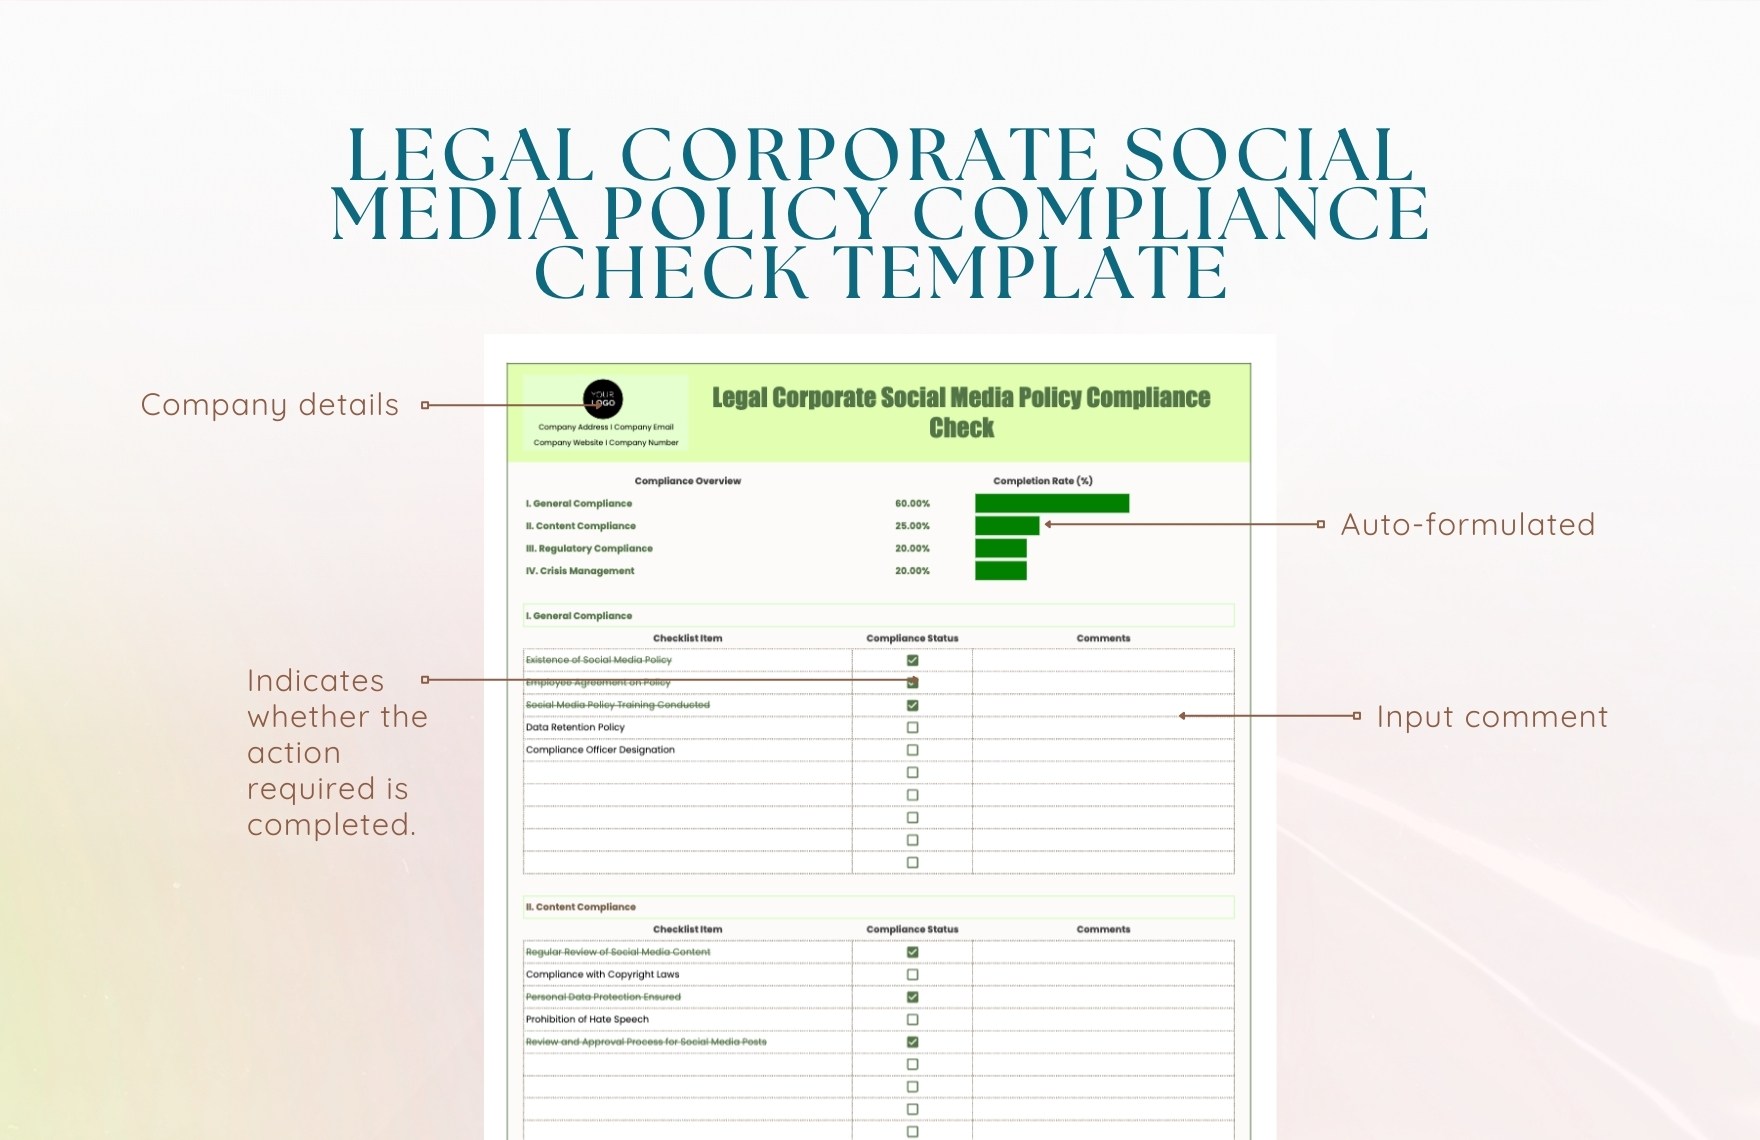 Legal Corporate Social Media Policy Compliance Check Template